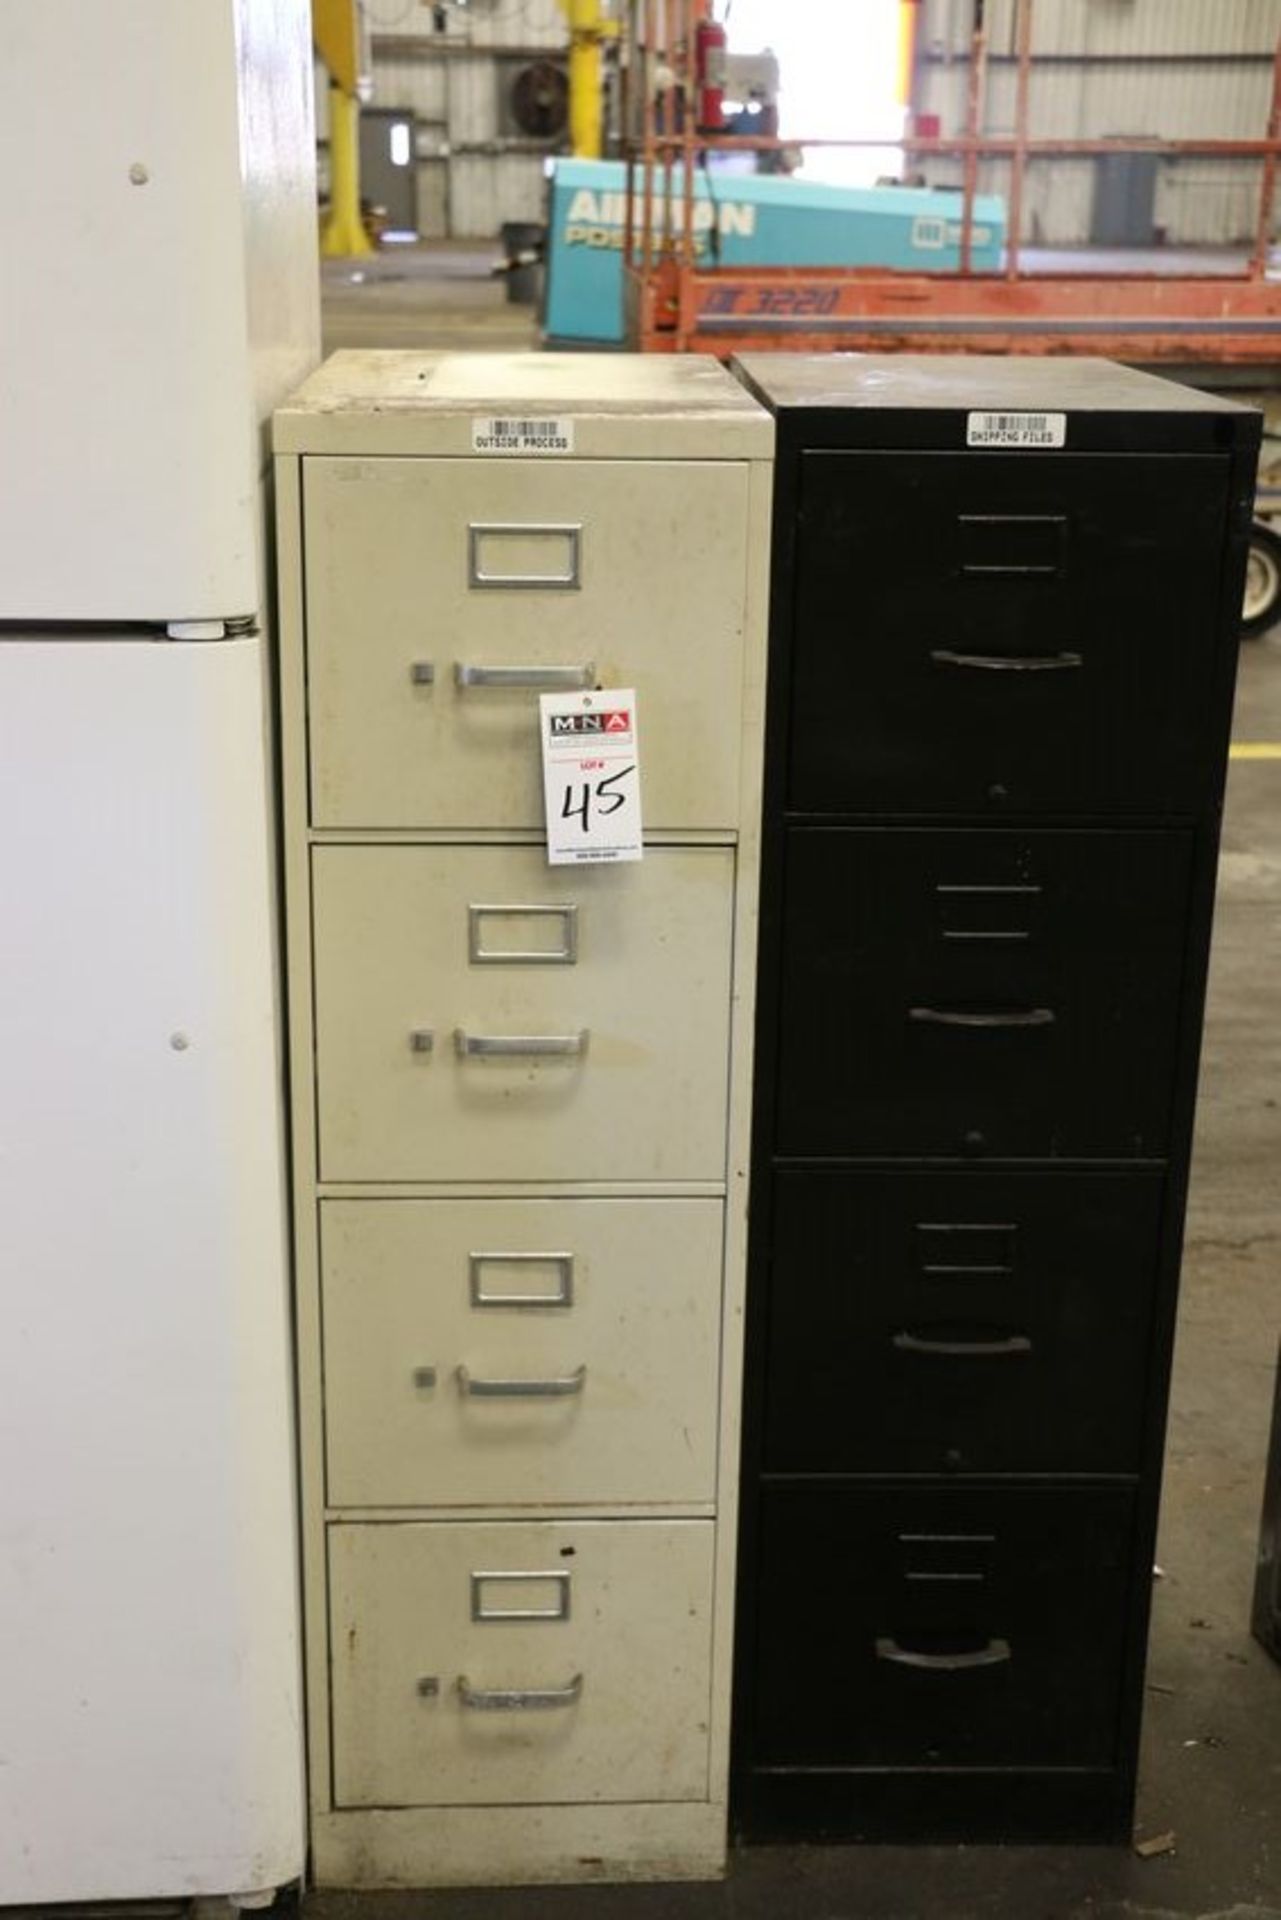 Lot of cabinets and lockers